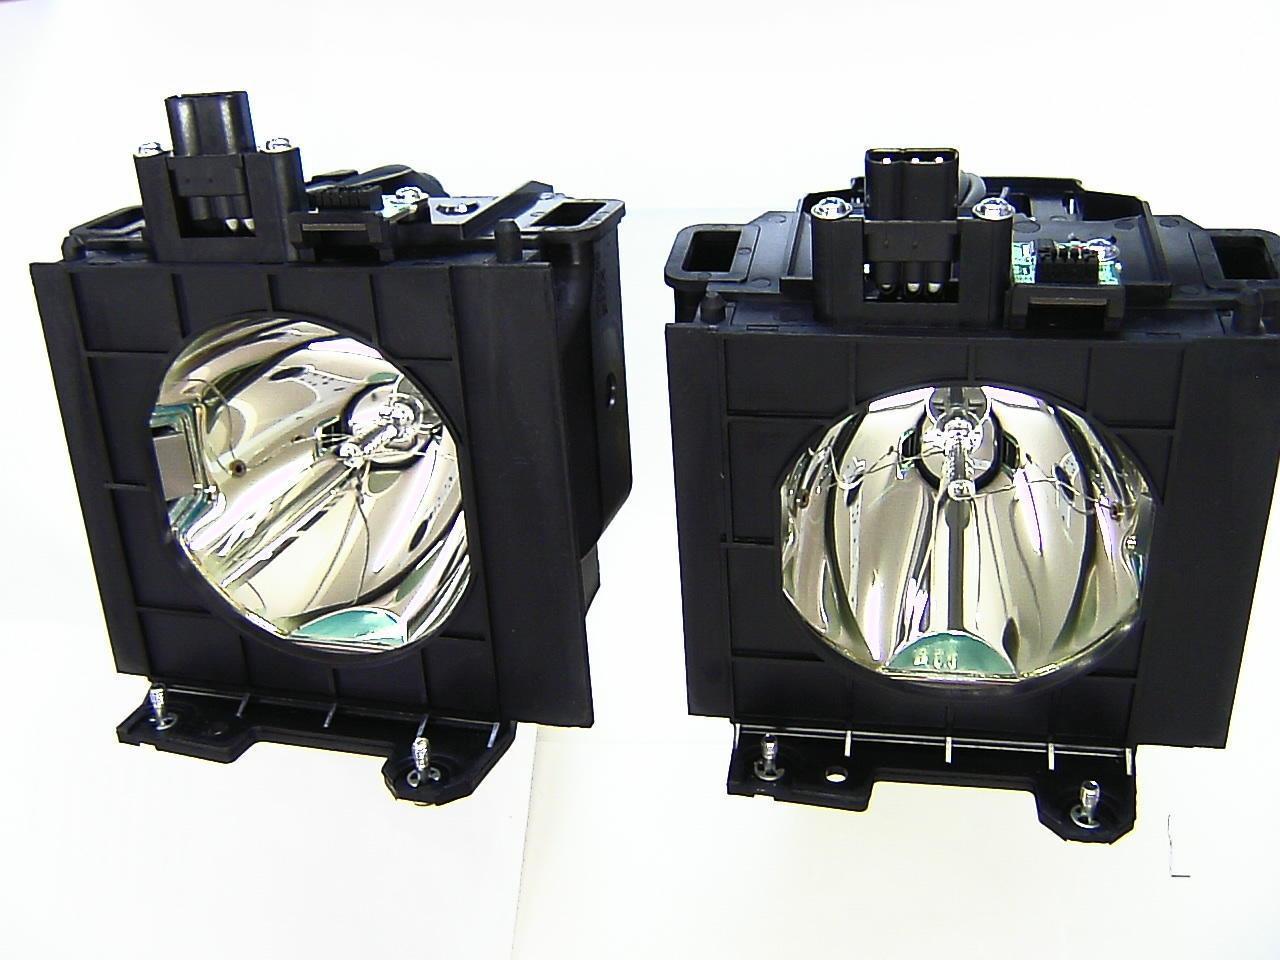 PT-D5700E Panasonic Twin-Pack Projector Lamp Replacement (contains two lamps). Projector Lamp Assembly with High Quality OEM Co